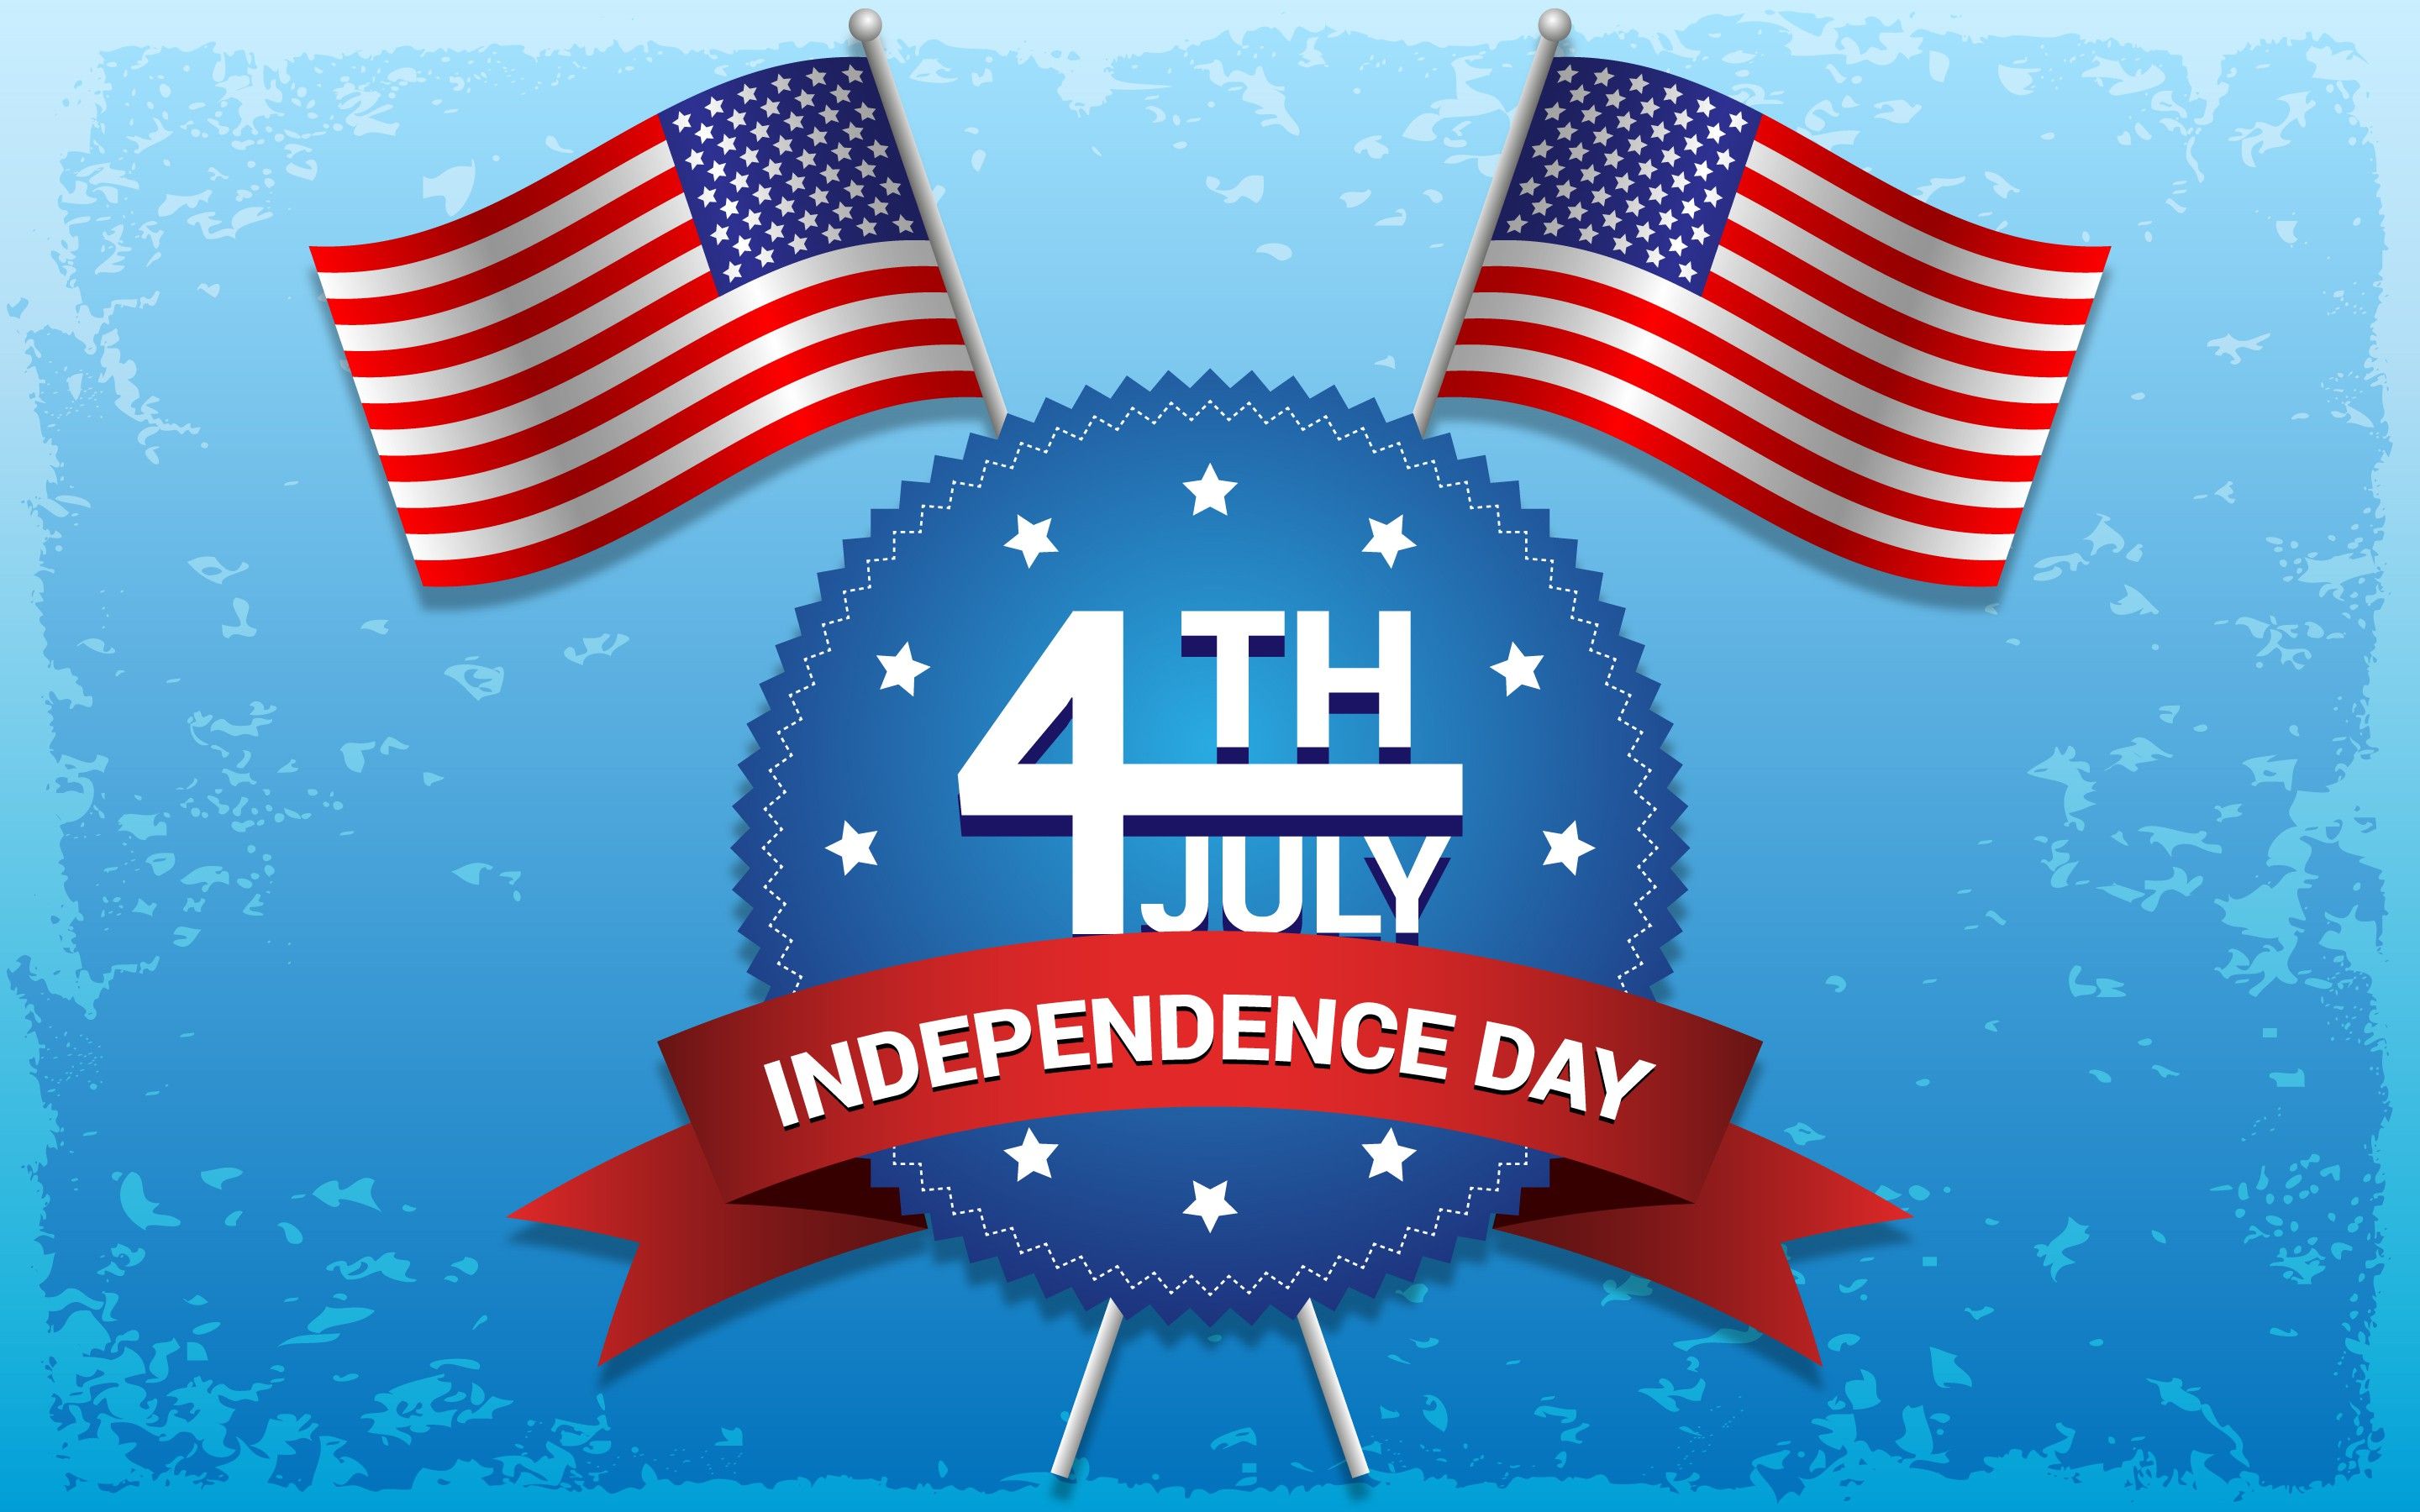 Pin on Happy 4th of July 2020 Images 2880x1800